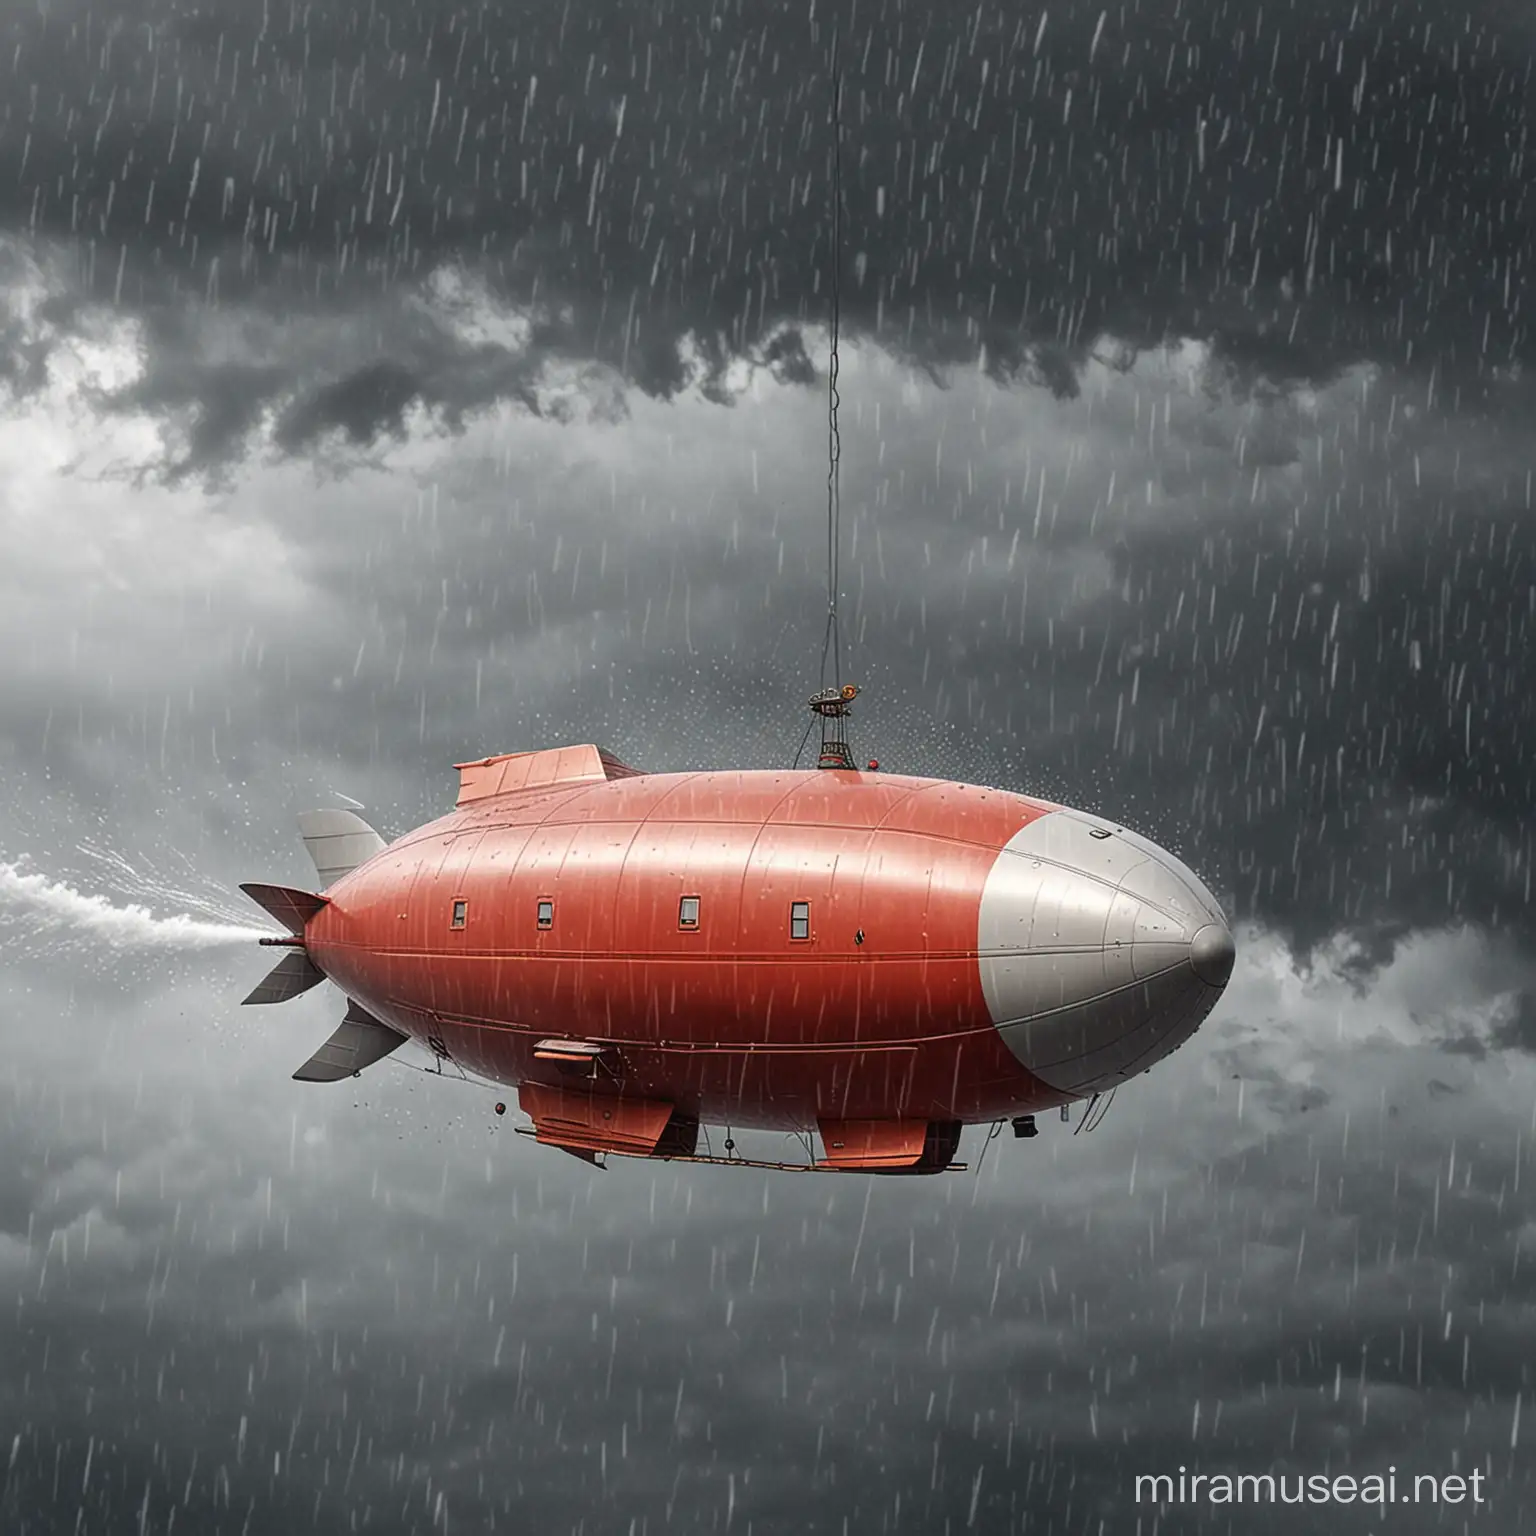 draw a cartoon of a air blimp in the sky being blown around  by heavy rain and strong winds